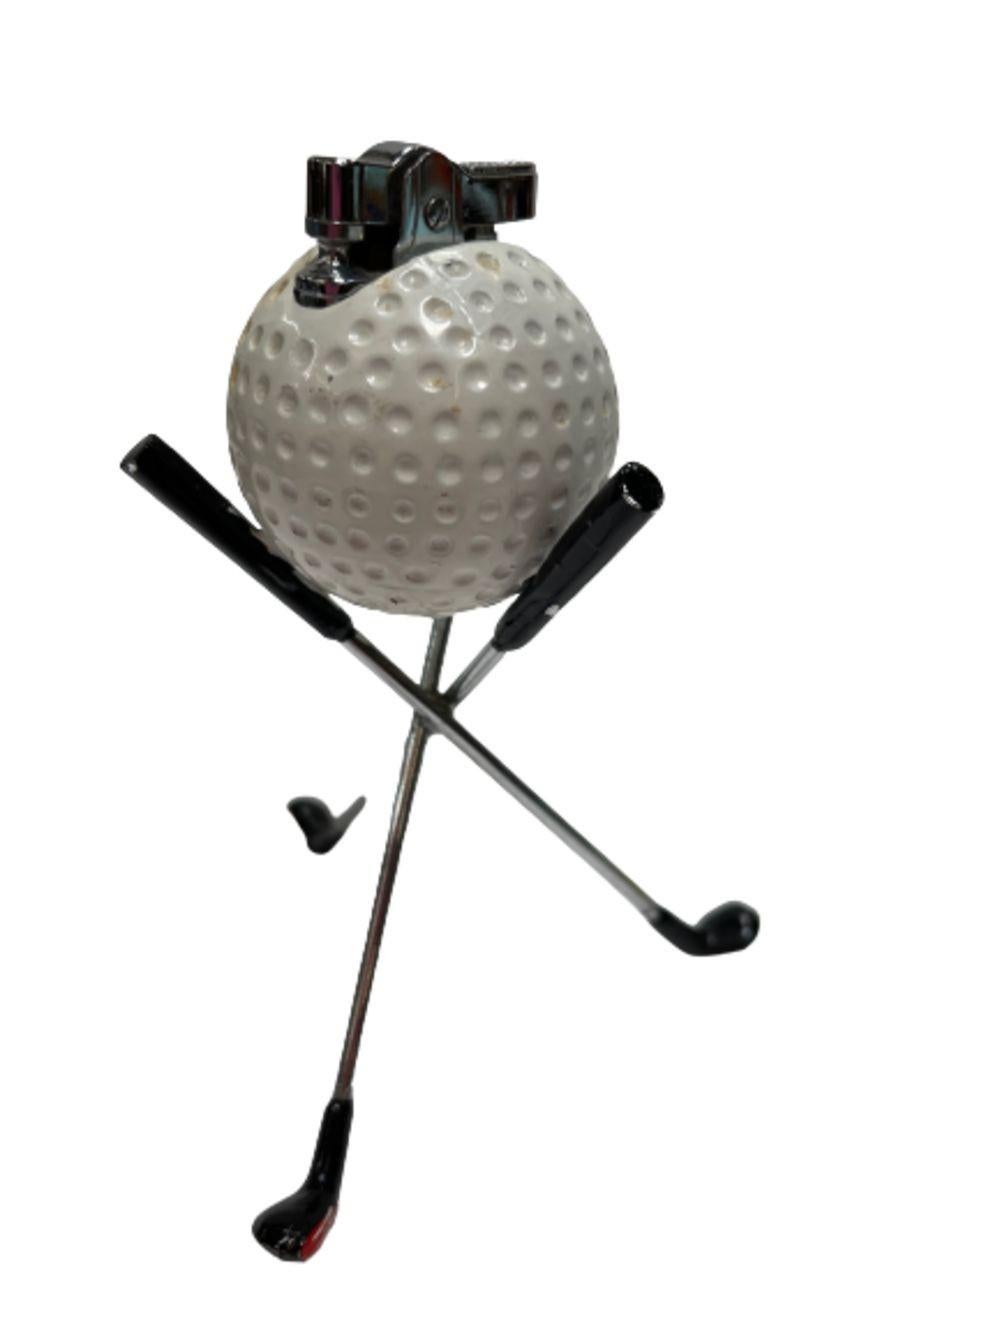 Mid Century Modern Novelty Pro Golf Ball Table Desk Lighter In Excellent Condition For Sale In Van Nuys, CA